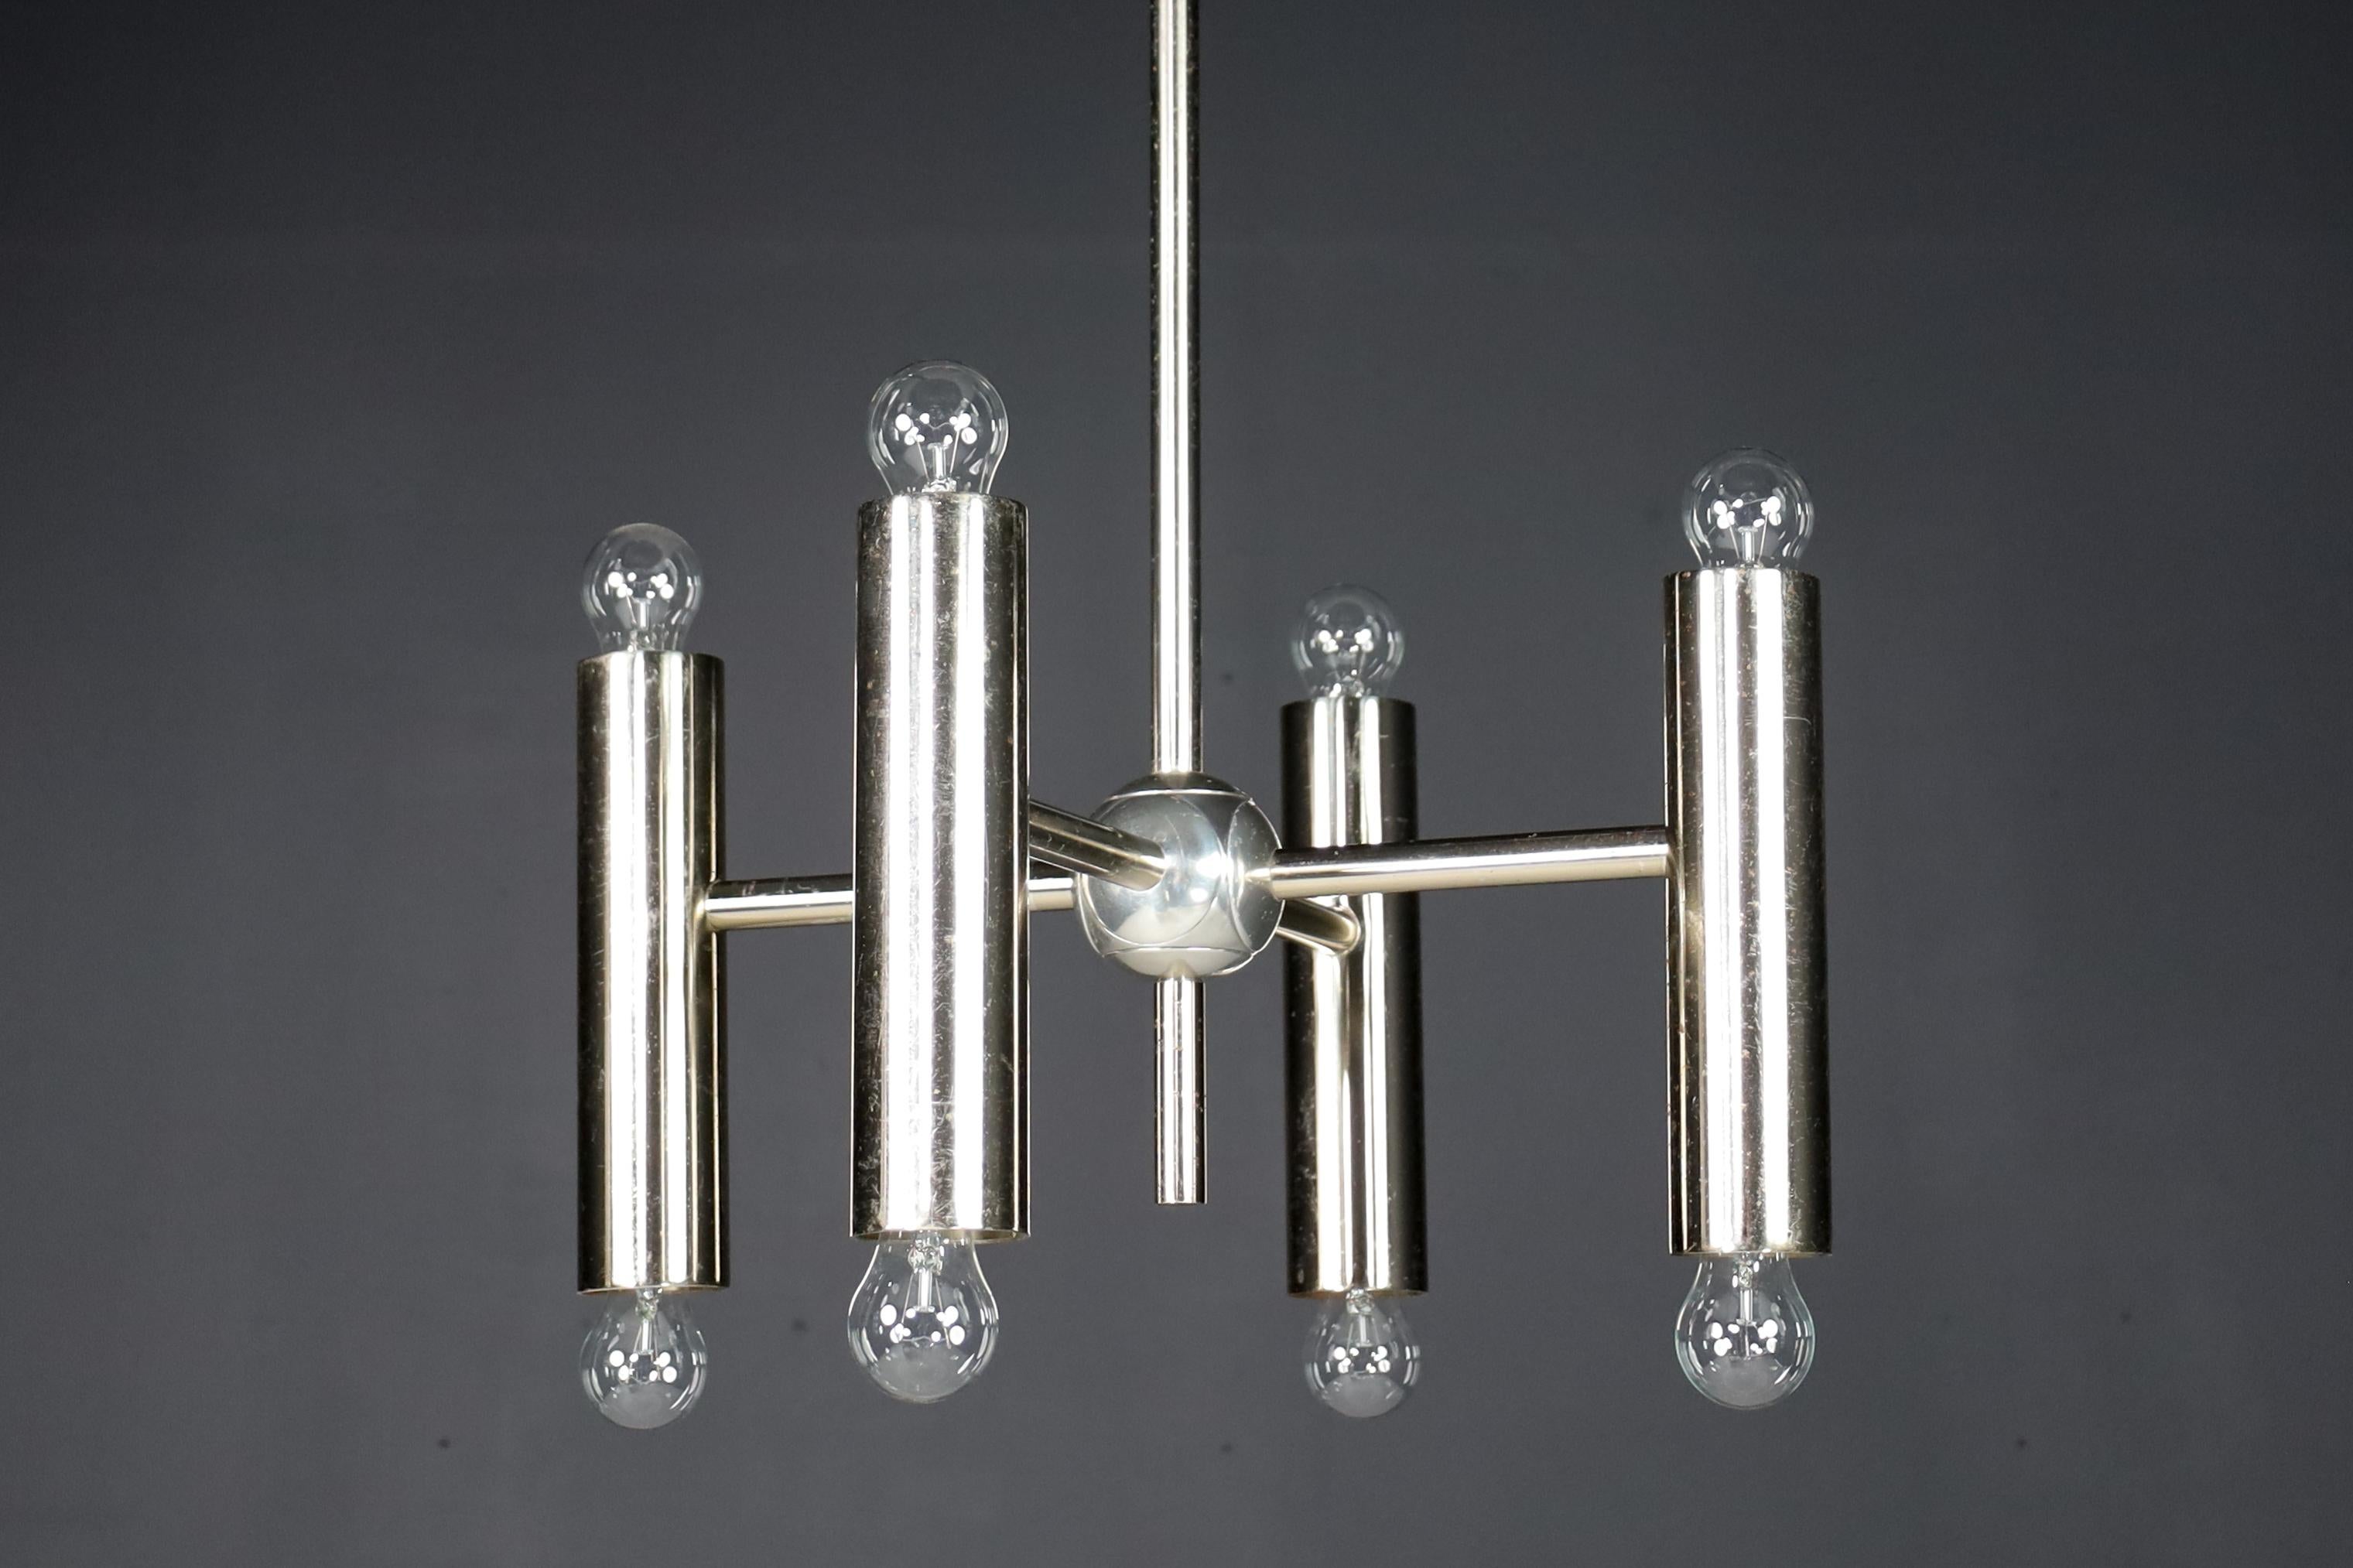 1 of 6 Minimalistic Design Geometric Chandeliers in Chrome, Germany, 1970s In Good Condition For Sale In Almelo, NL